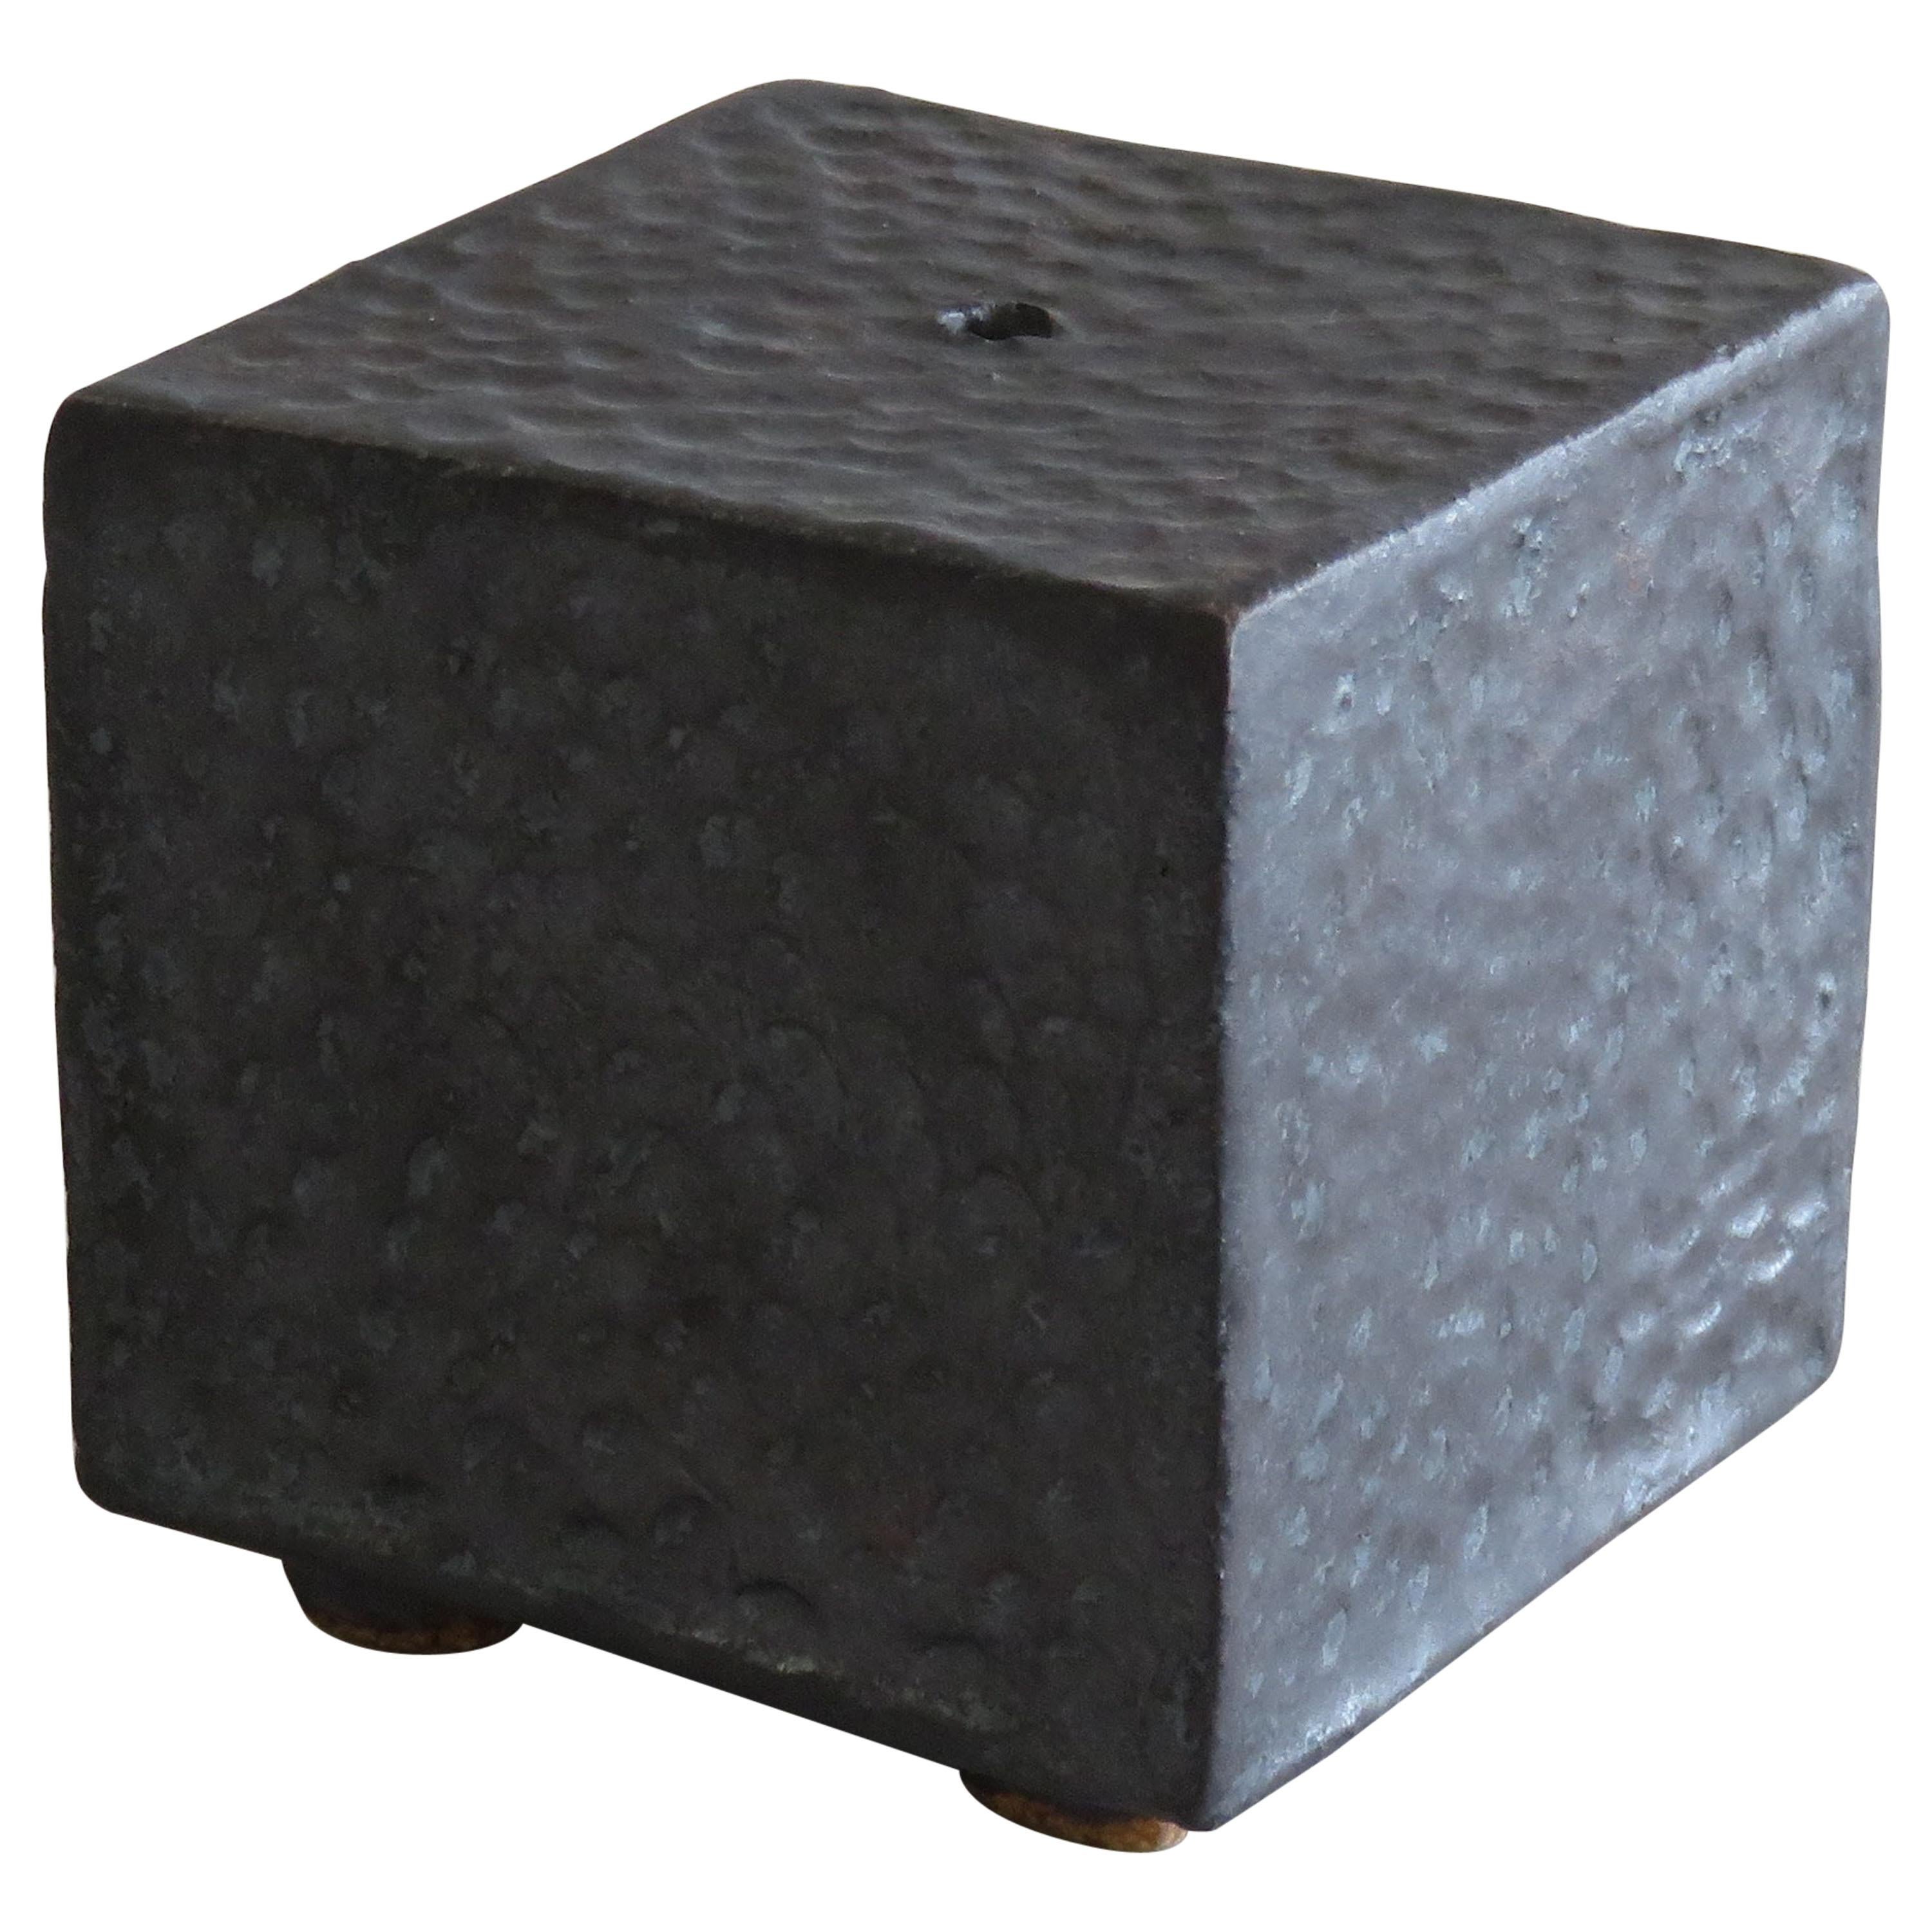 Small Ceramic Contemplation Cube, Mottled Surface in Metallic Black-Brown Glaze